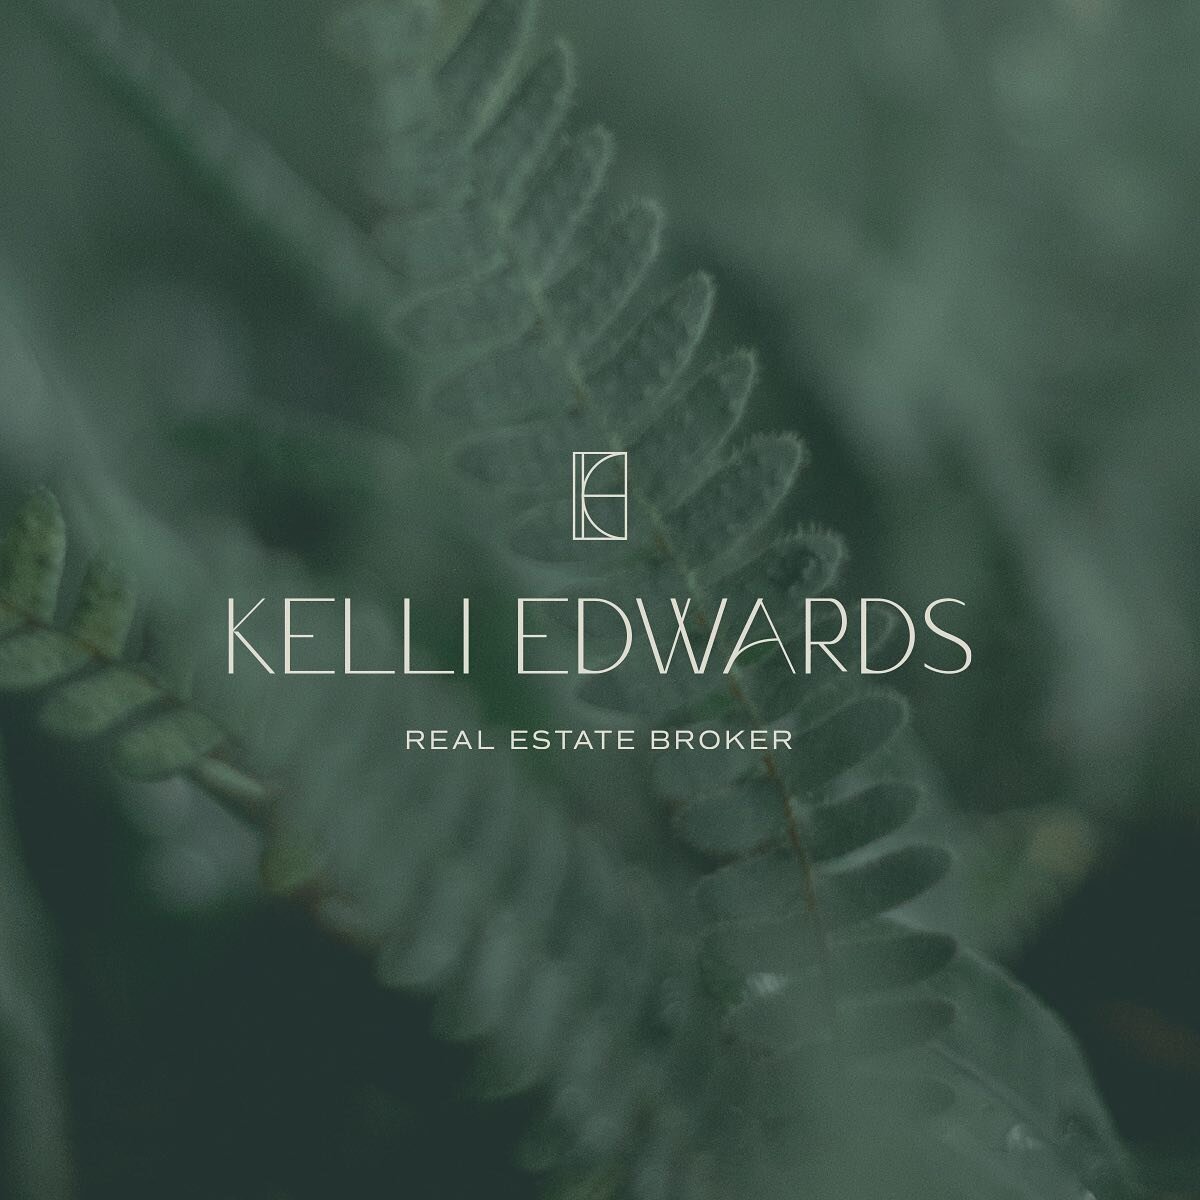 Client work alert!

@kelliedwardsre is a real estate broker in the Greater Seattle area. With her straightforward honesty and resourcefulness, she wants to make the world a better place by helping people invest in their own future and for generations